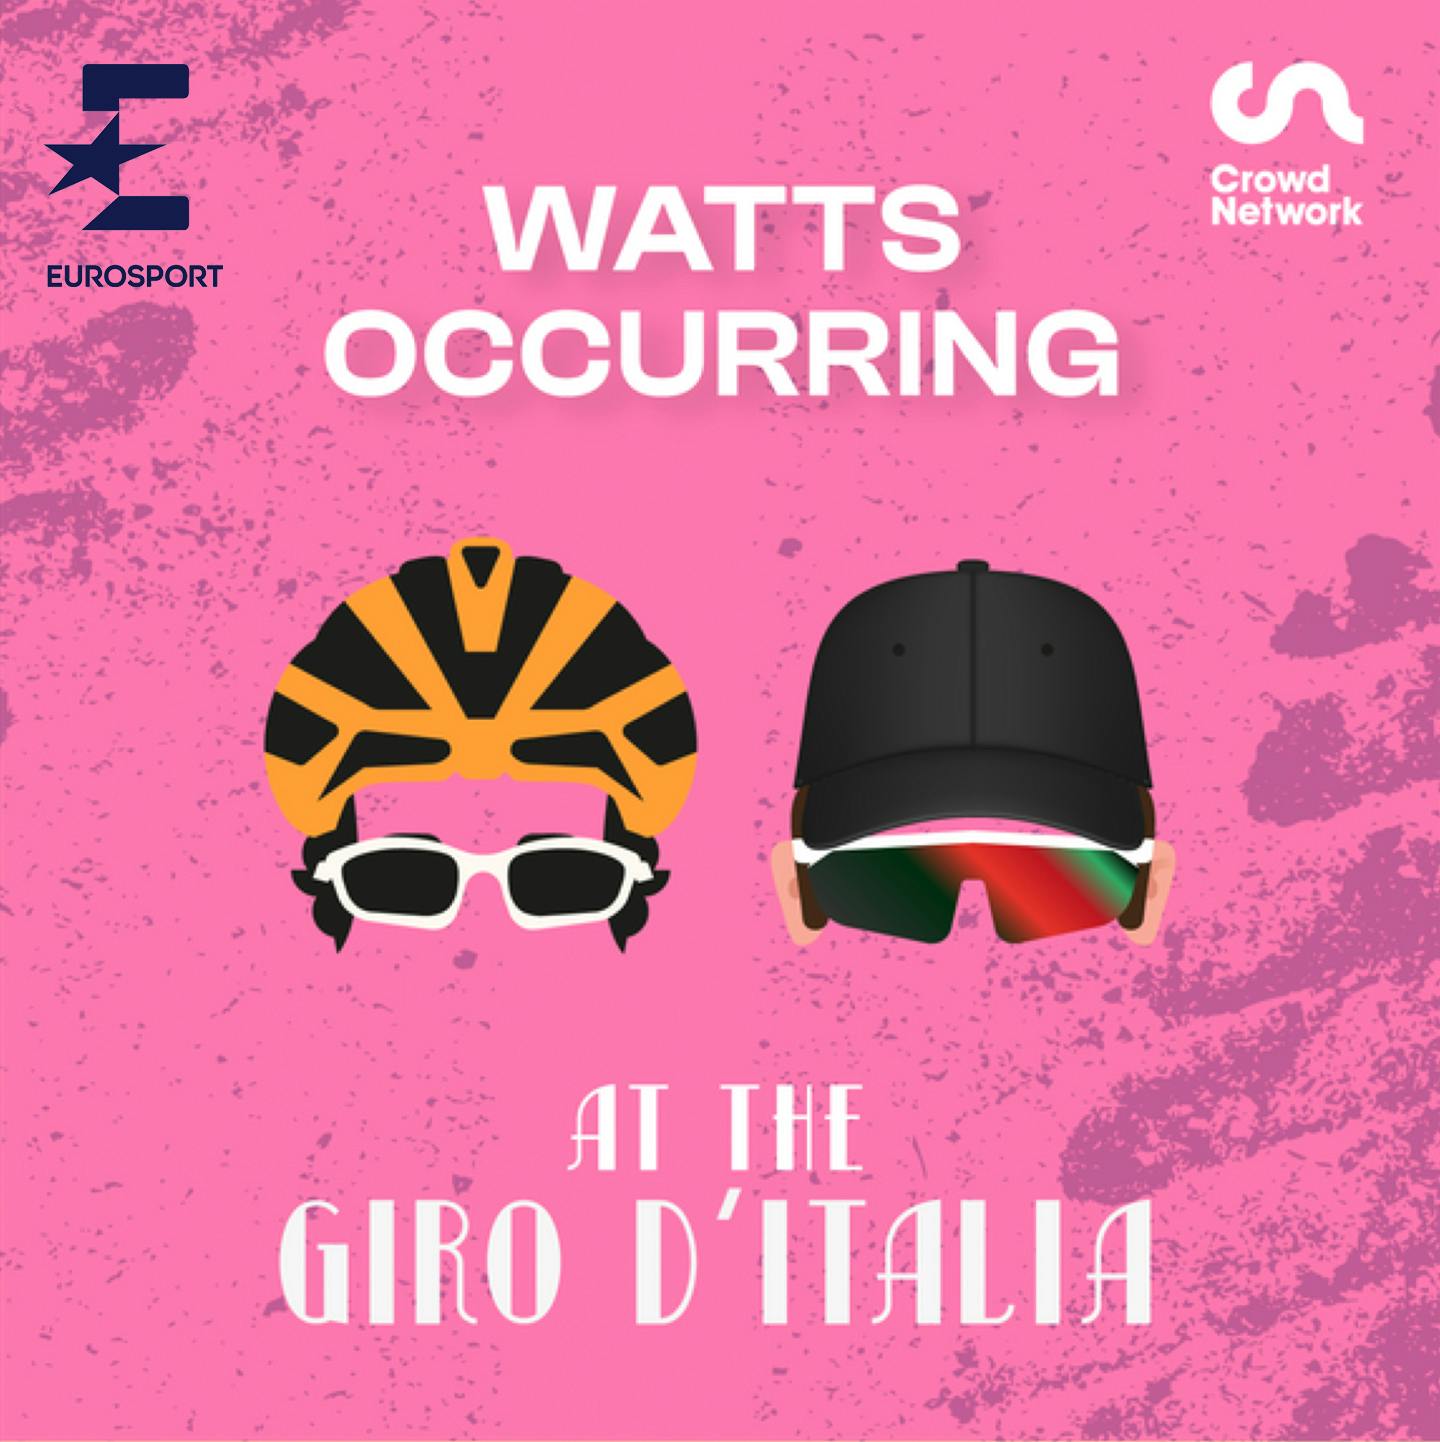 Hold that wheel son: G and Pog on the attack at the Giro - Watts Occurring powered by Eurosport